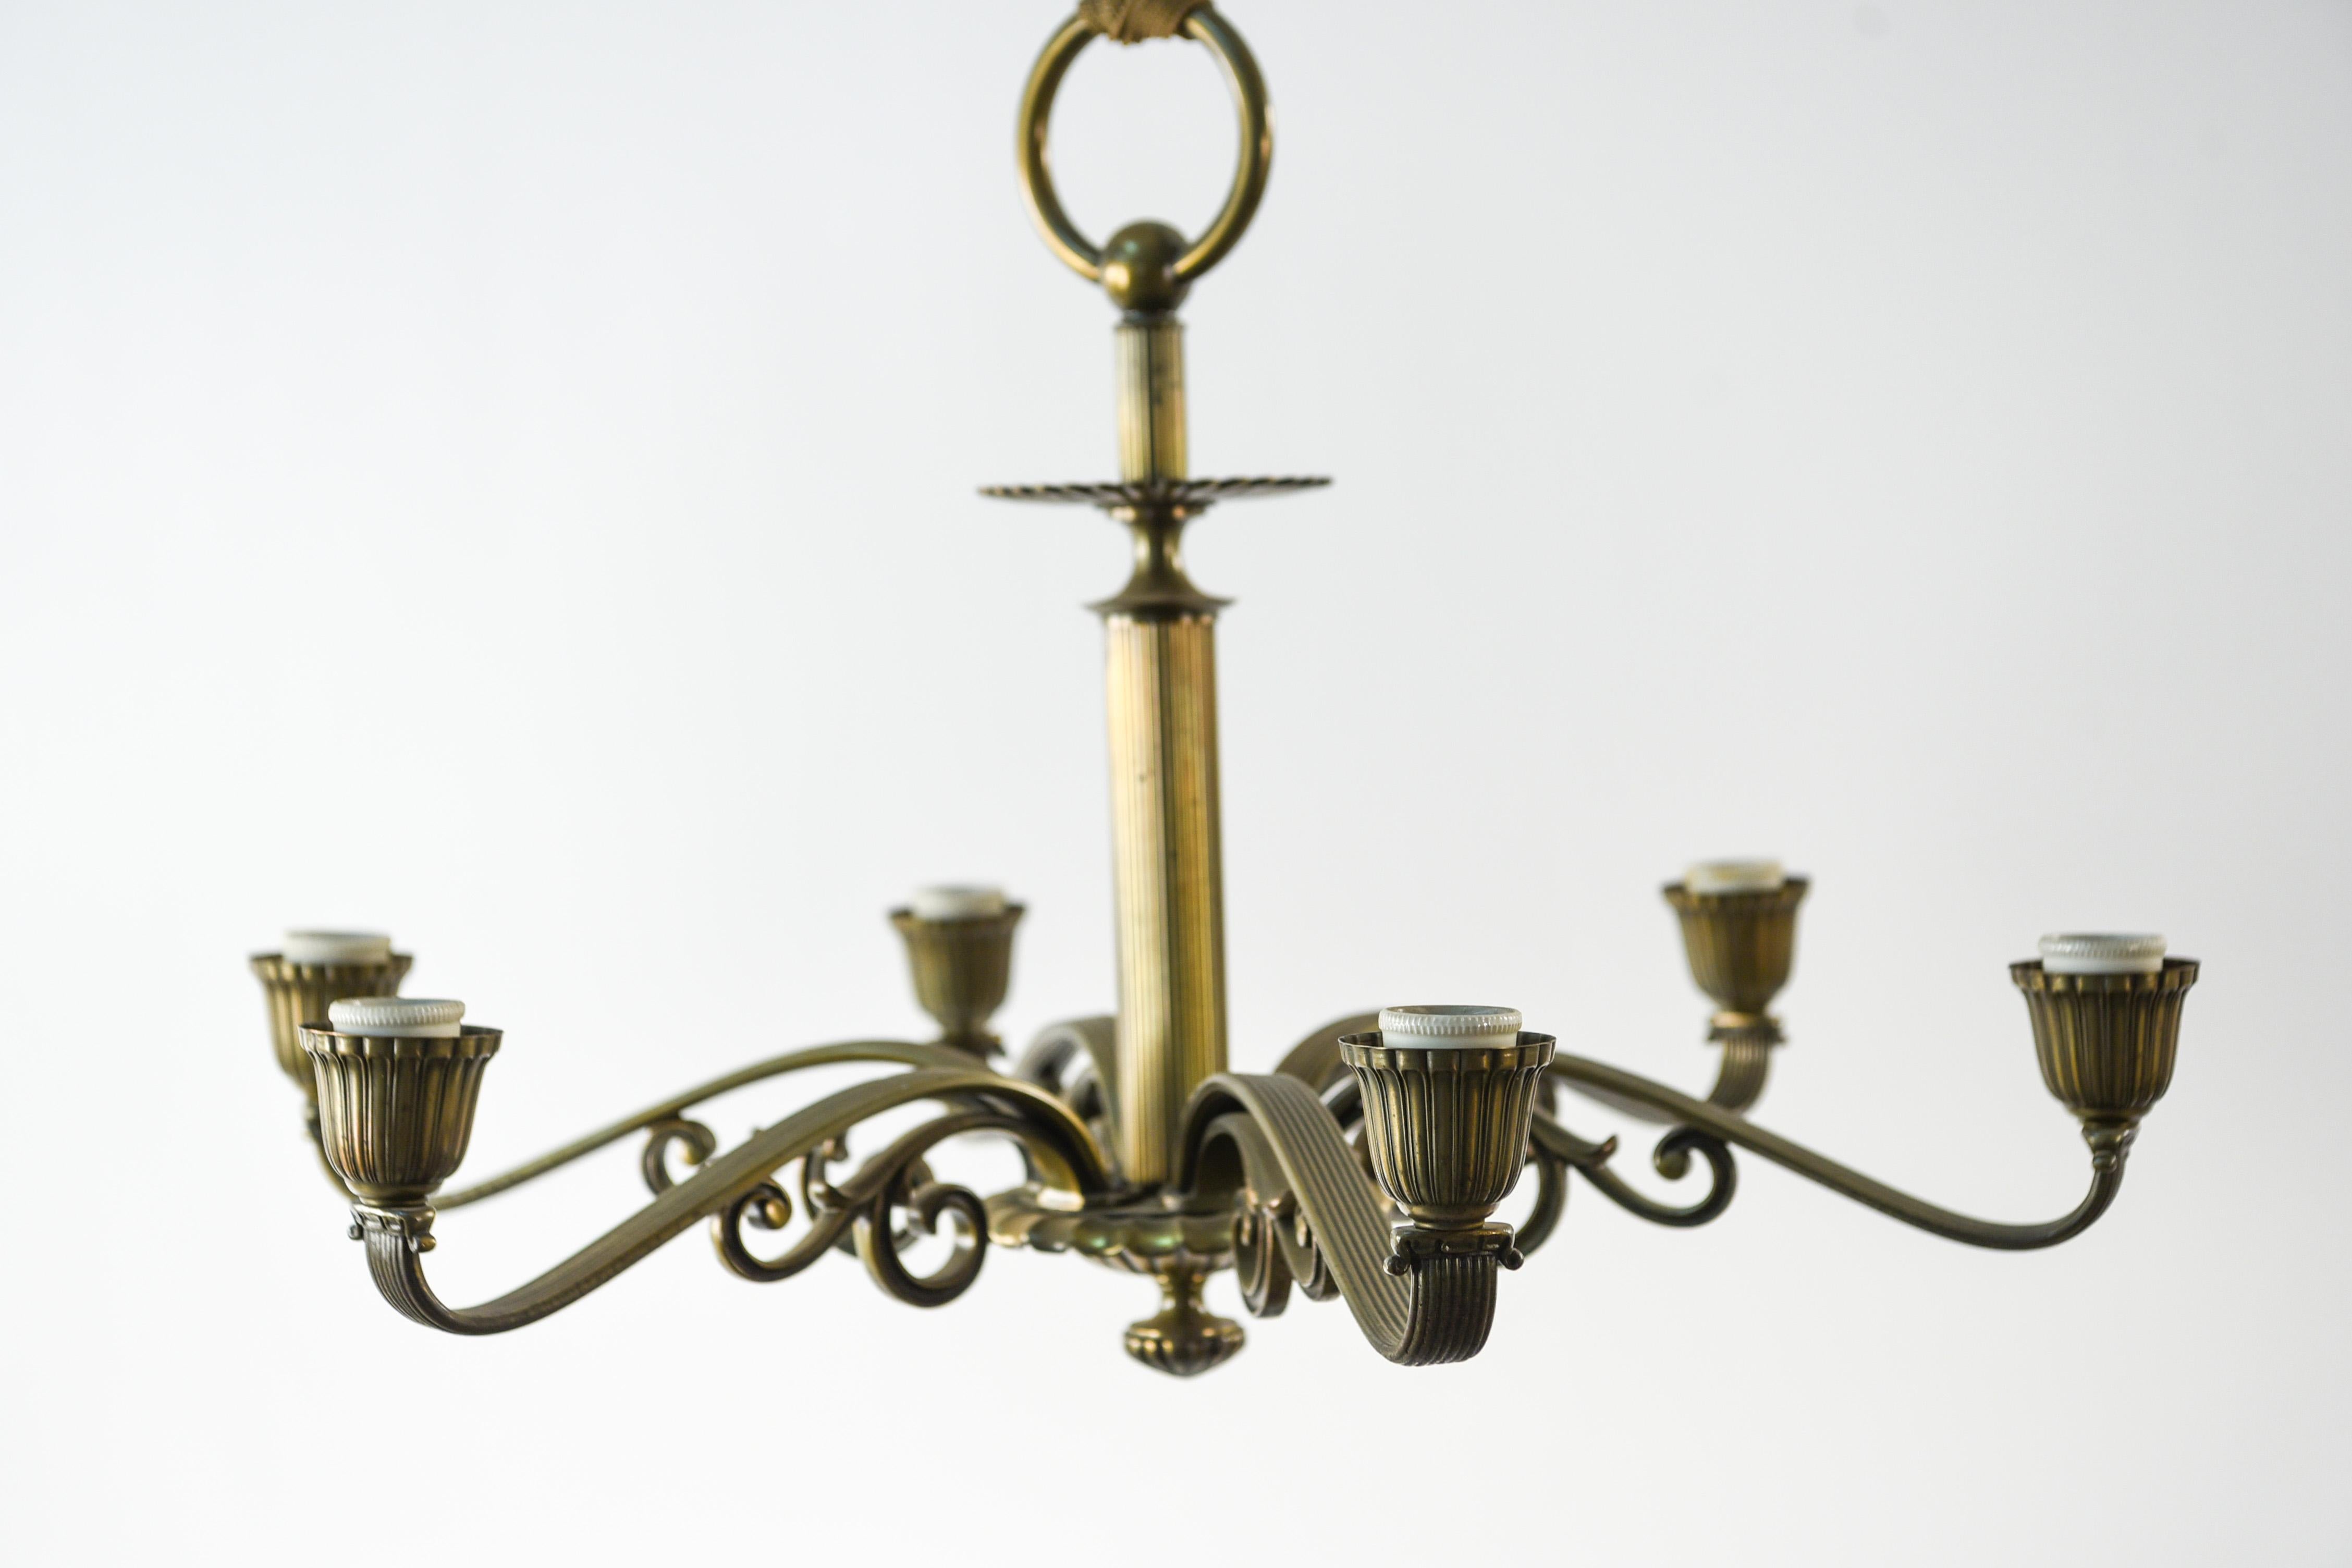 This six-arm Danish chandelier is from the Art Deco period. This piece features a reeded body and arms, with ornate swirls below. This chandelier has a timeless elegance to it.